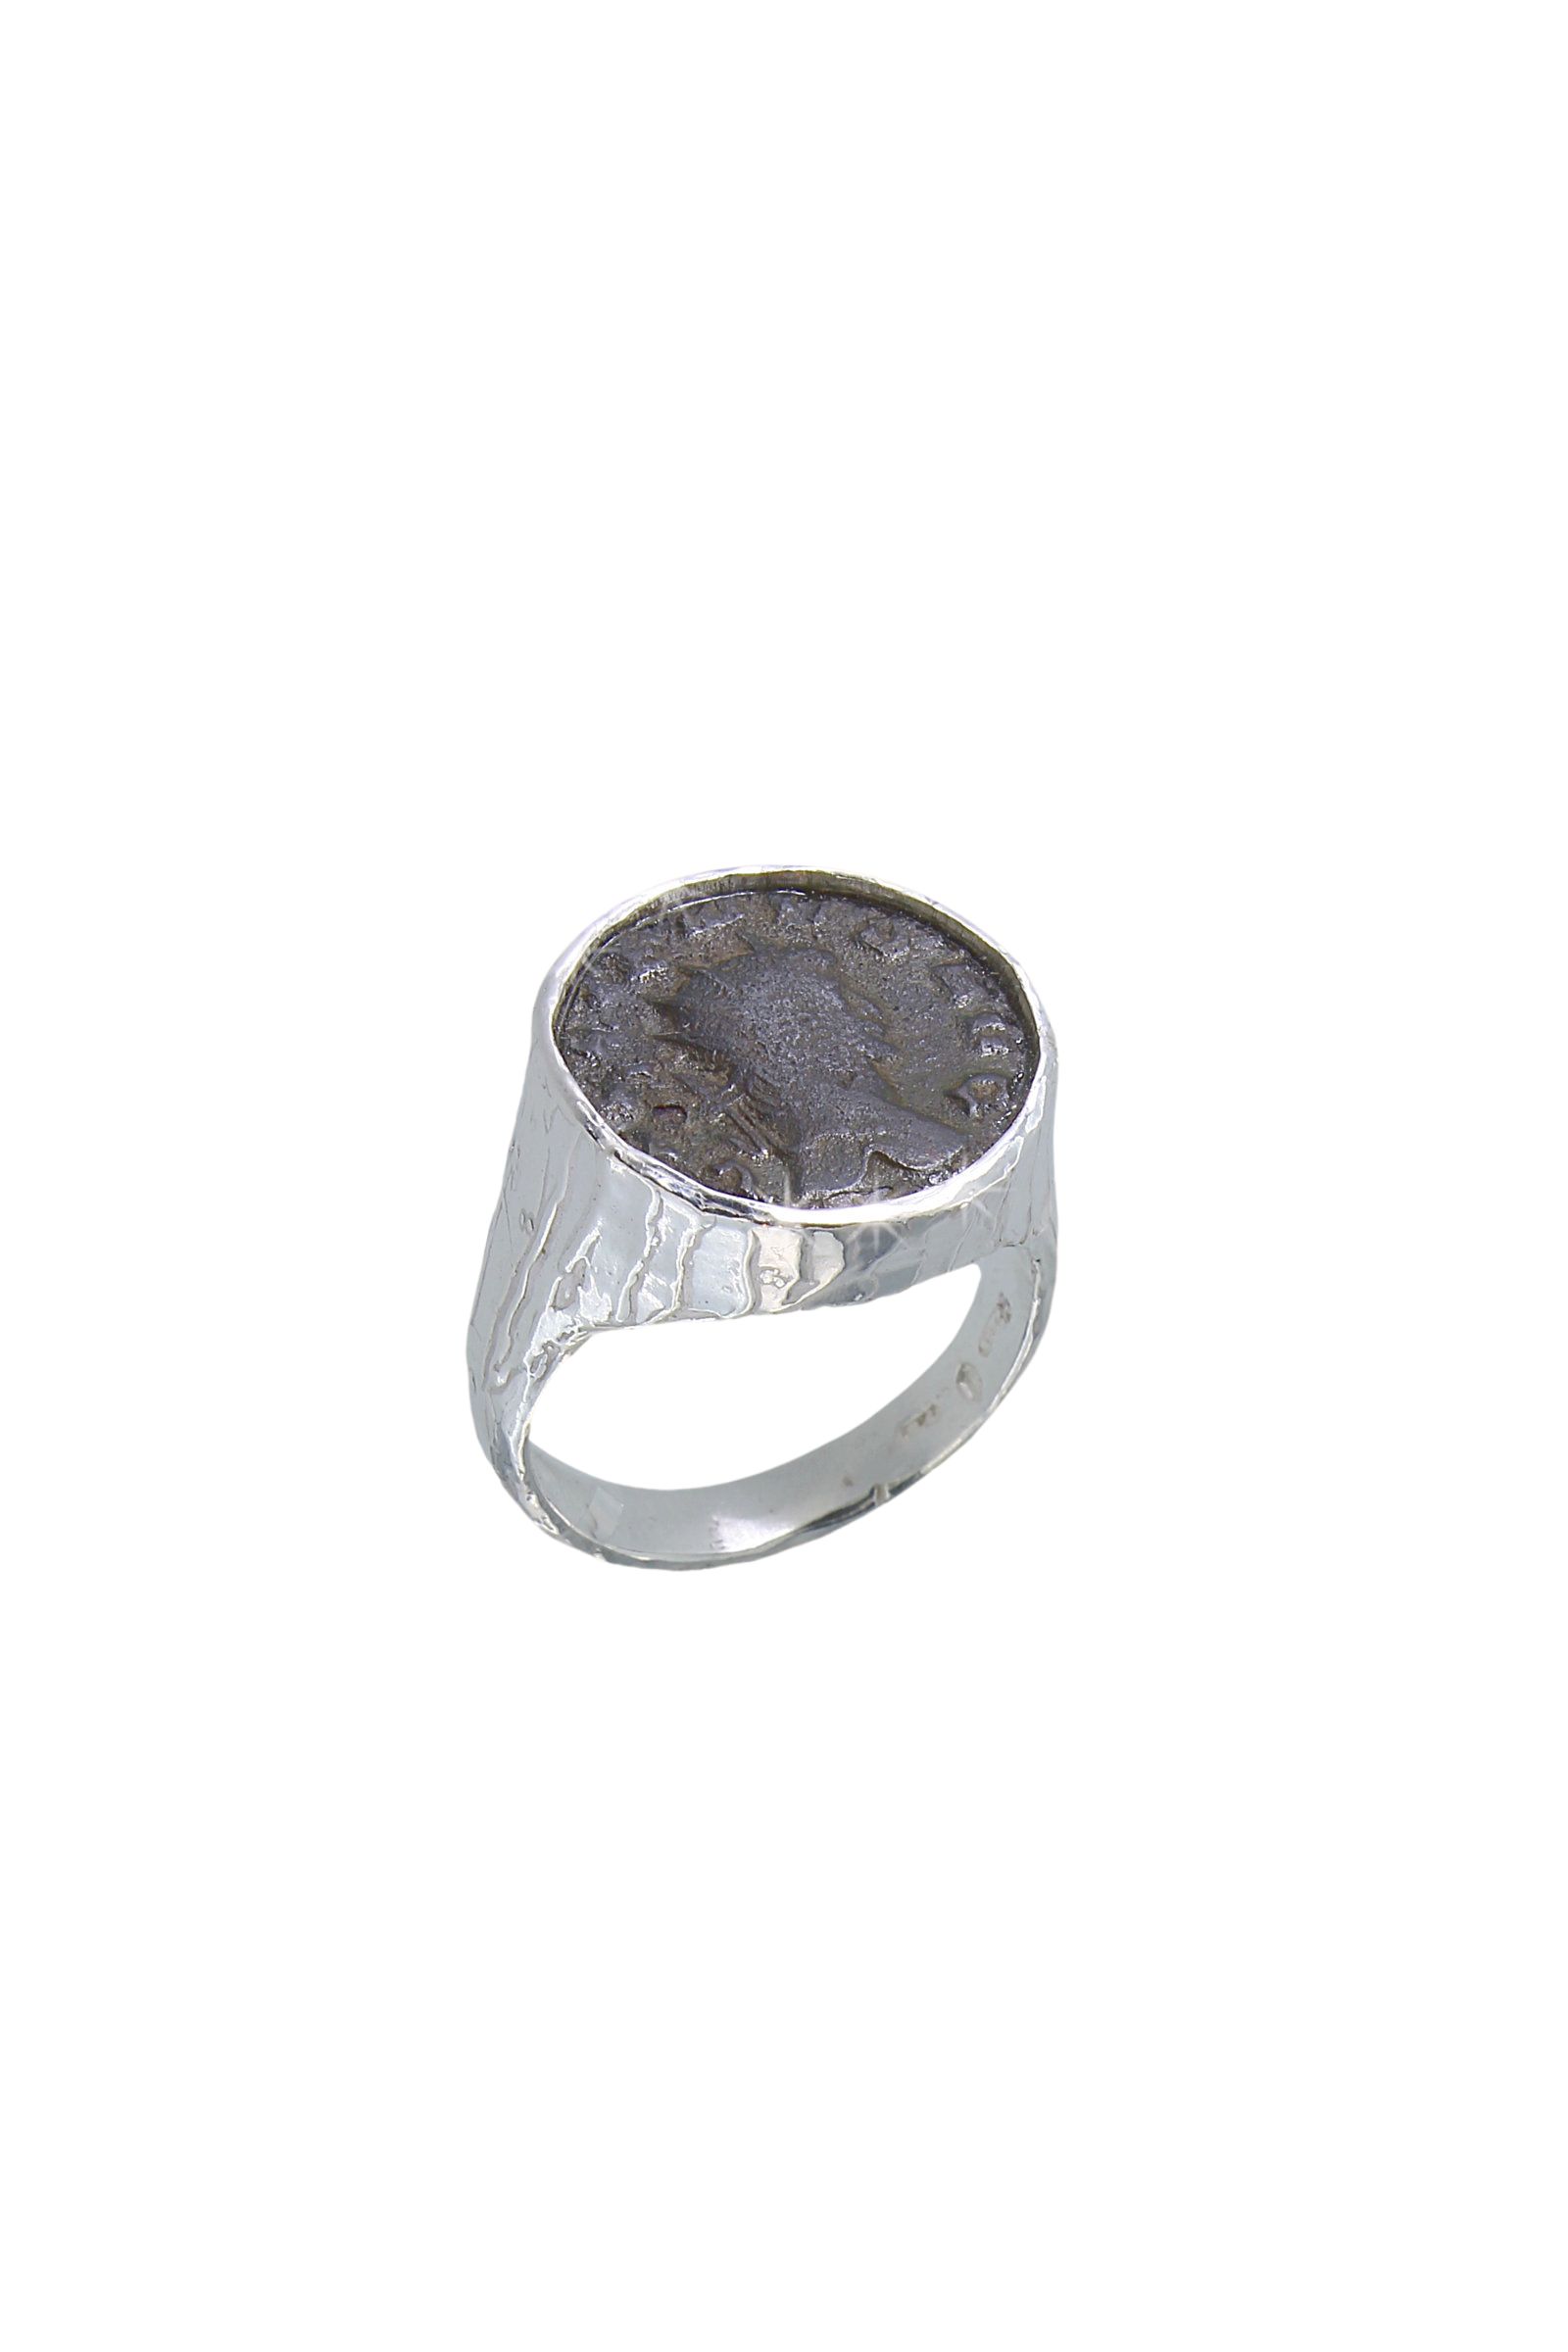 AE651-Sterling-Silver-925-Roman-Coin-Ring-1_